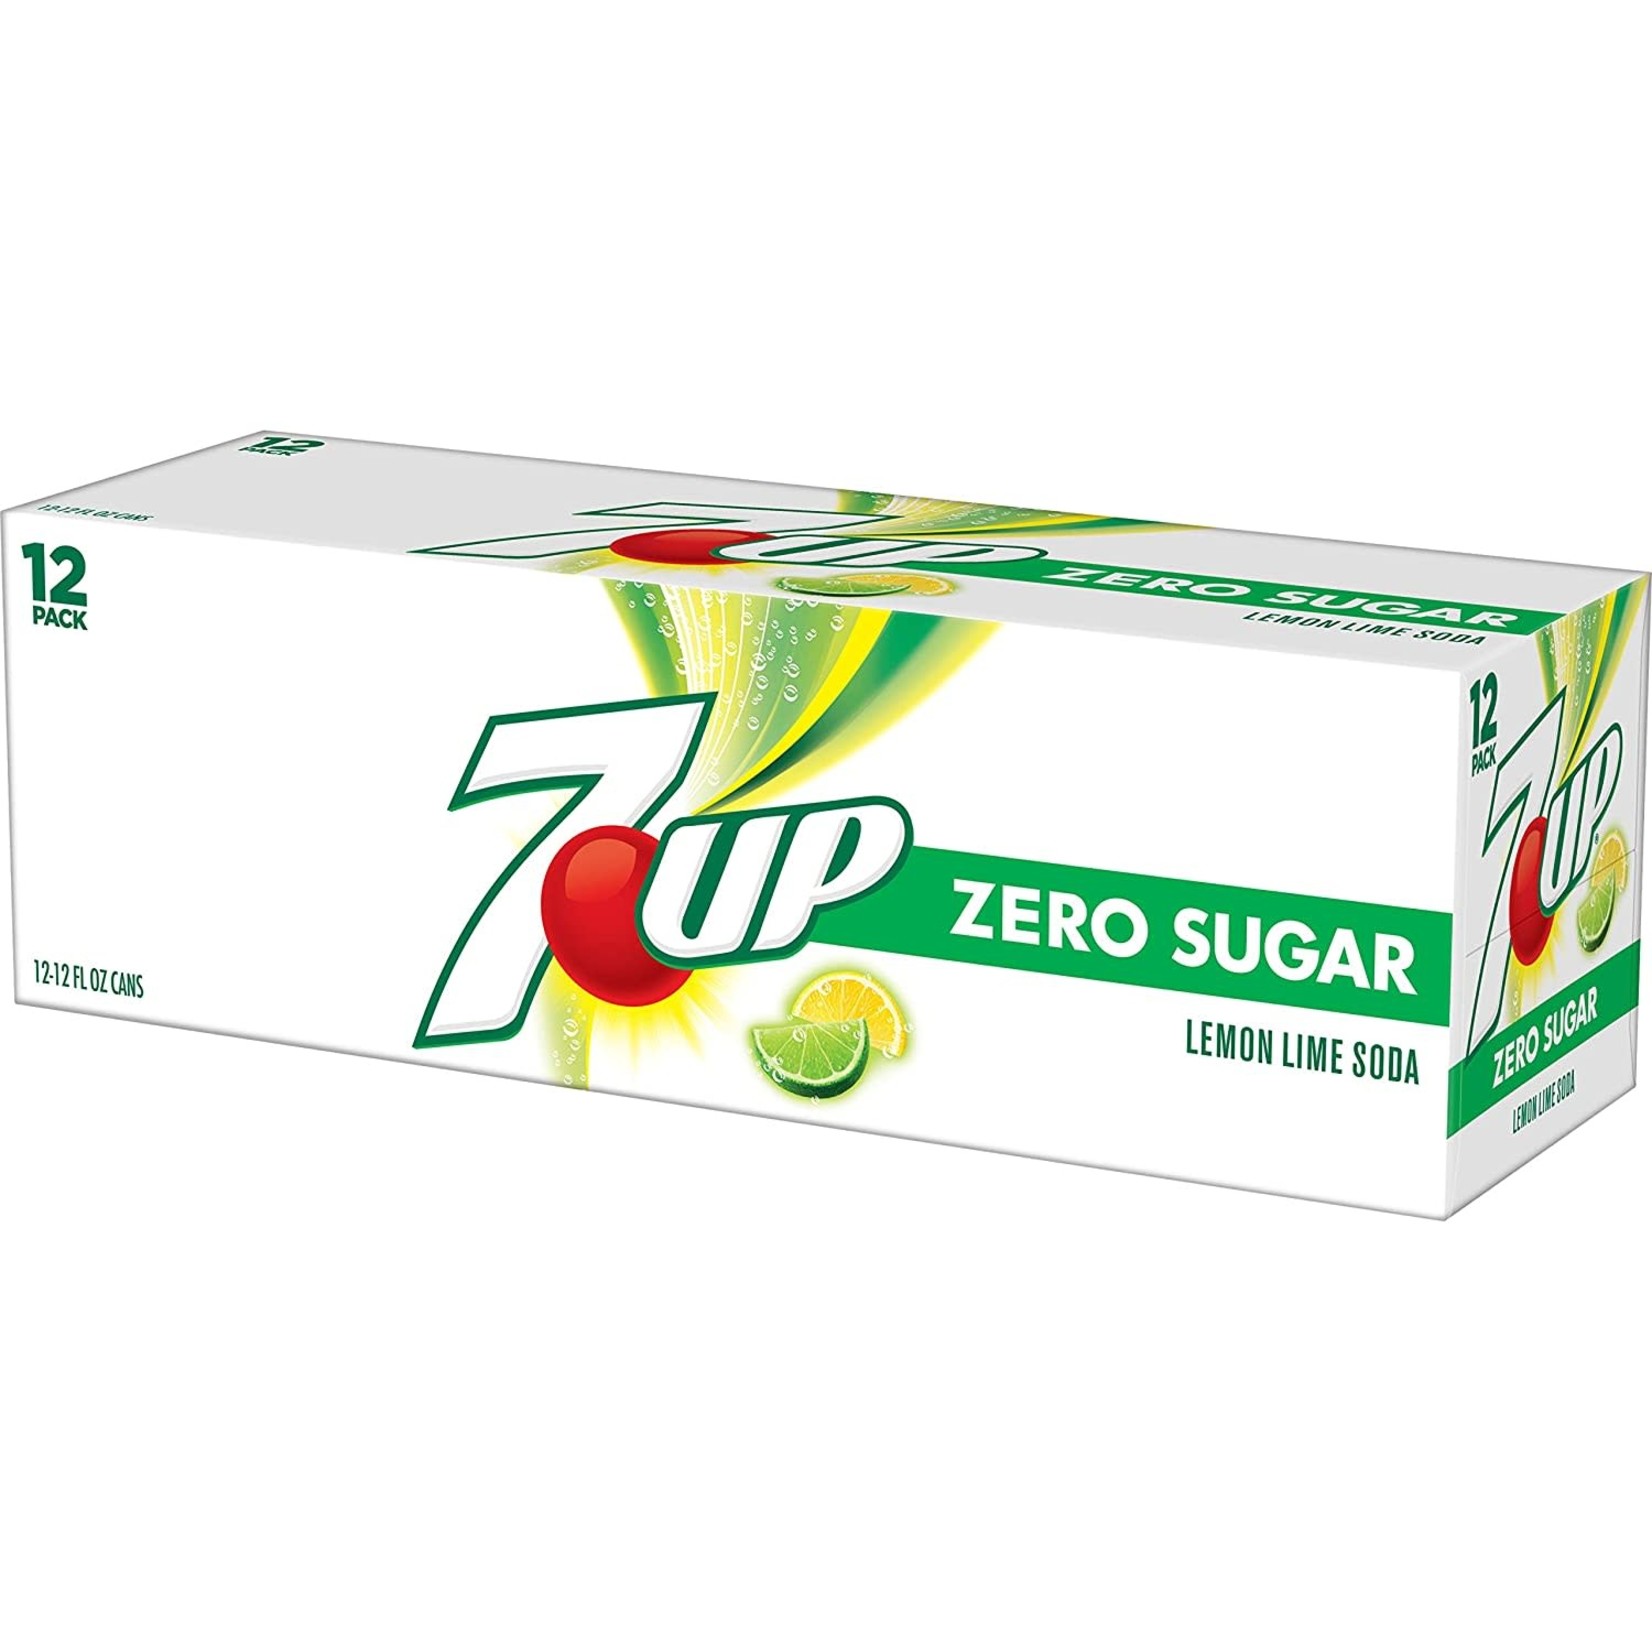 7 up Diet 7 Up 12 x 12 oz cans